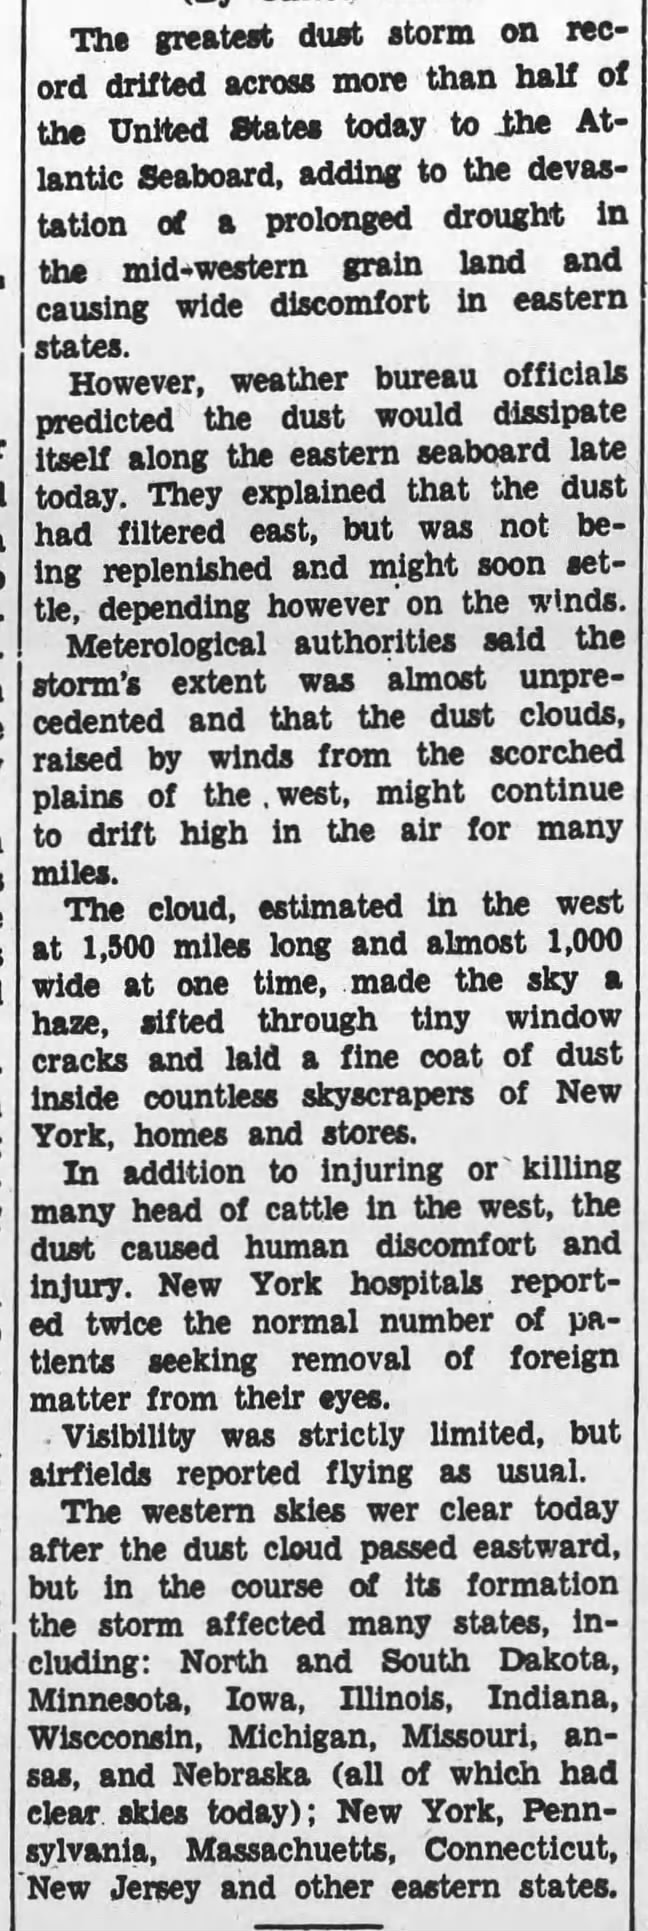 Newspaper article about big dust storm in 1934; blows dirt to East Coast and kills cattle